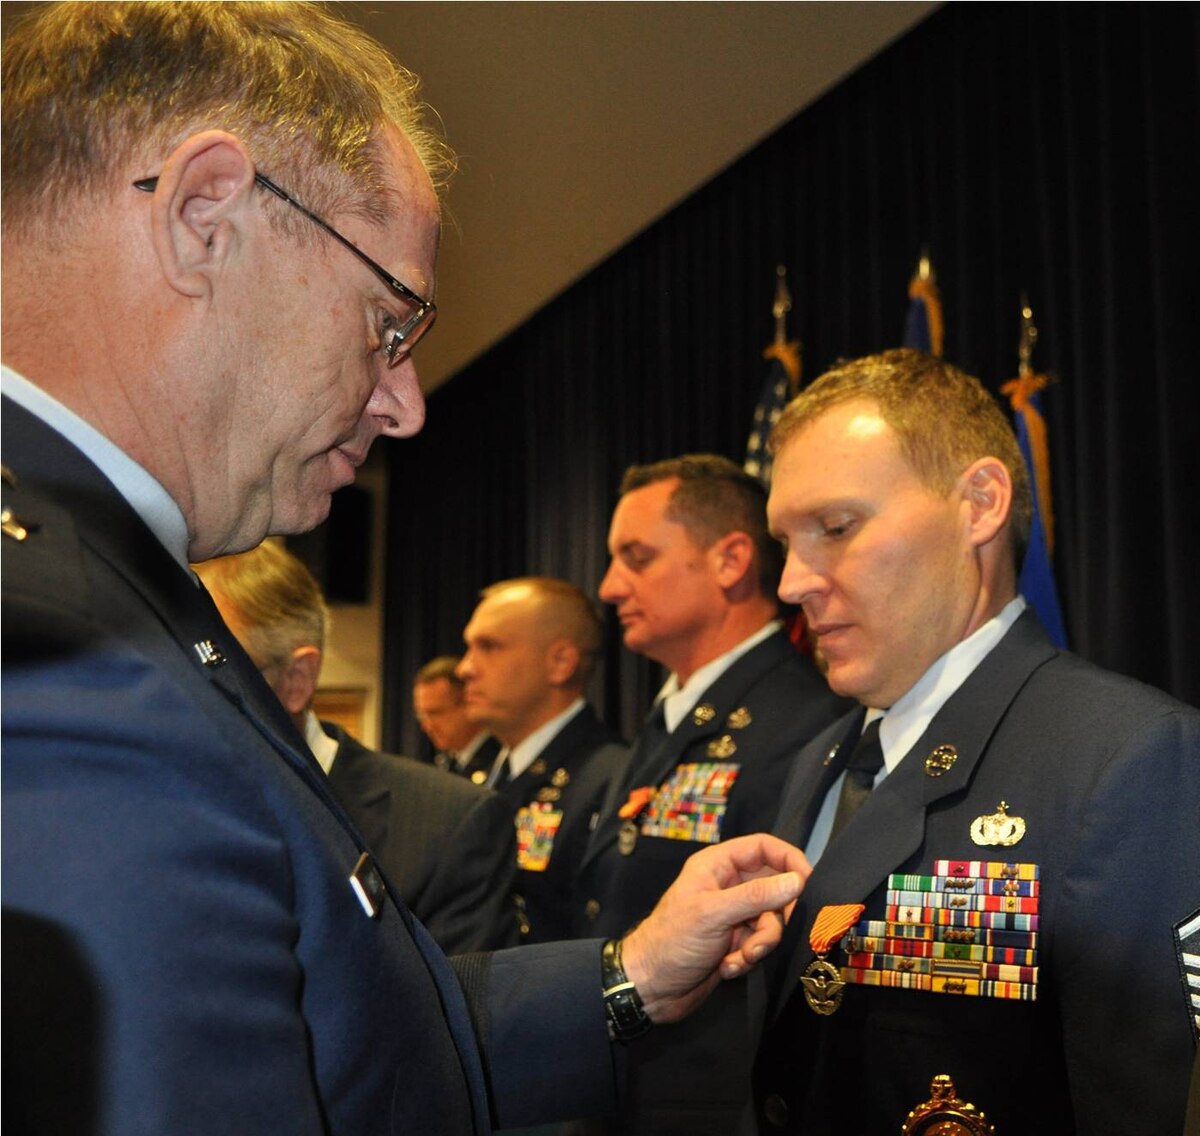 Master Sgt. Clinton Dudley, right, receives the Air Force Combat Action Medal from Nevada Adjutant General Brig. Gen. William Burks on Dec. 5 in Reno, Dudley and seven other Airmen received their medals more than a decade after participating in a battle in Afghanistan in February 2002.  NV ANG photo by Senior Airman Ashif Halim RELEASED.